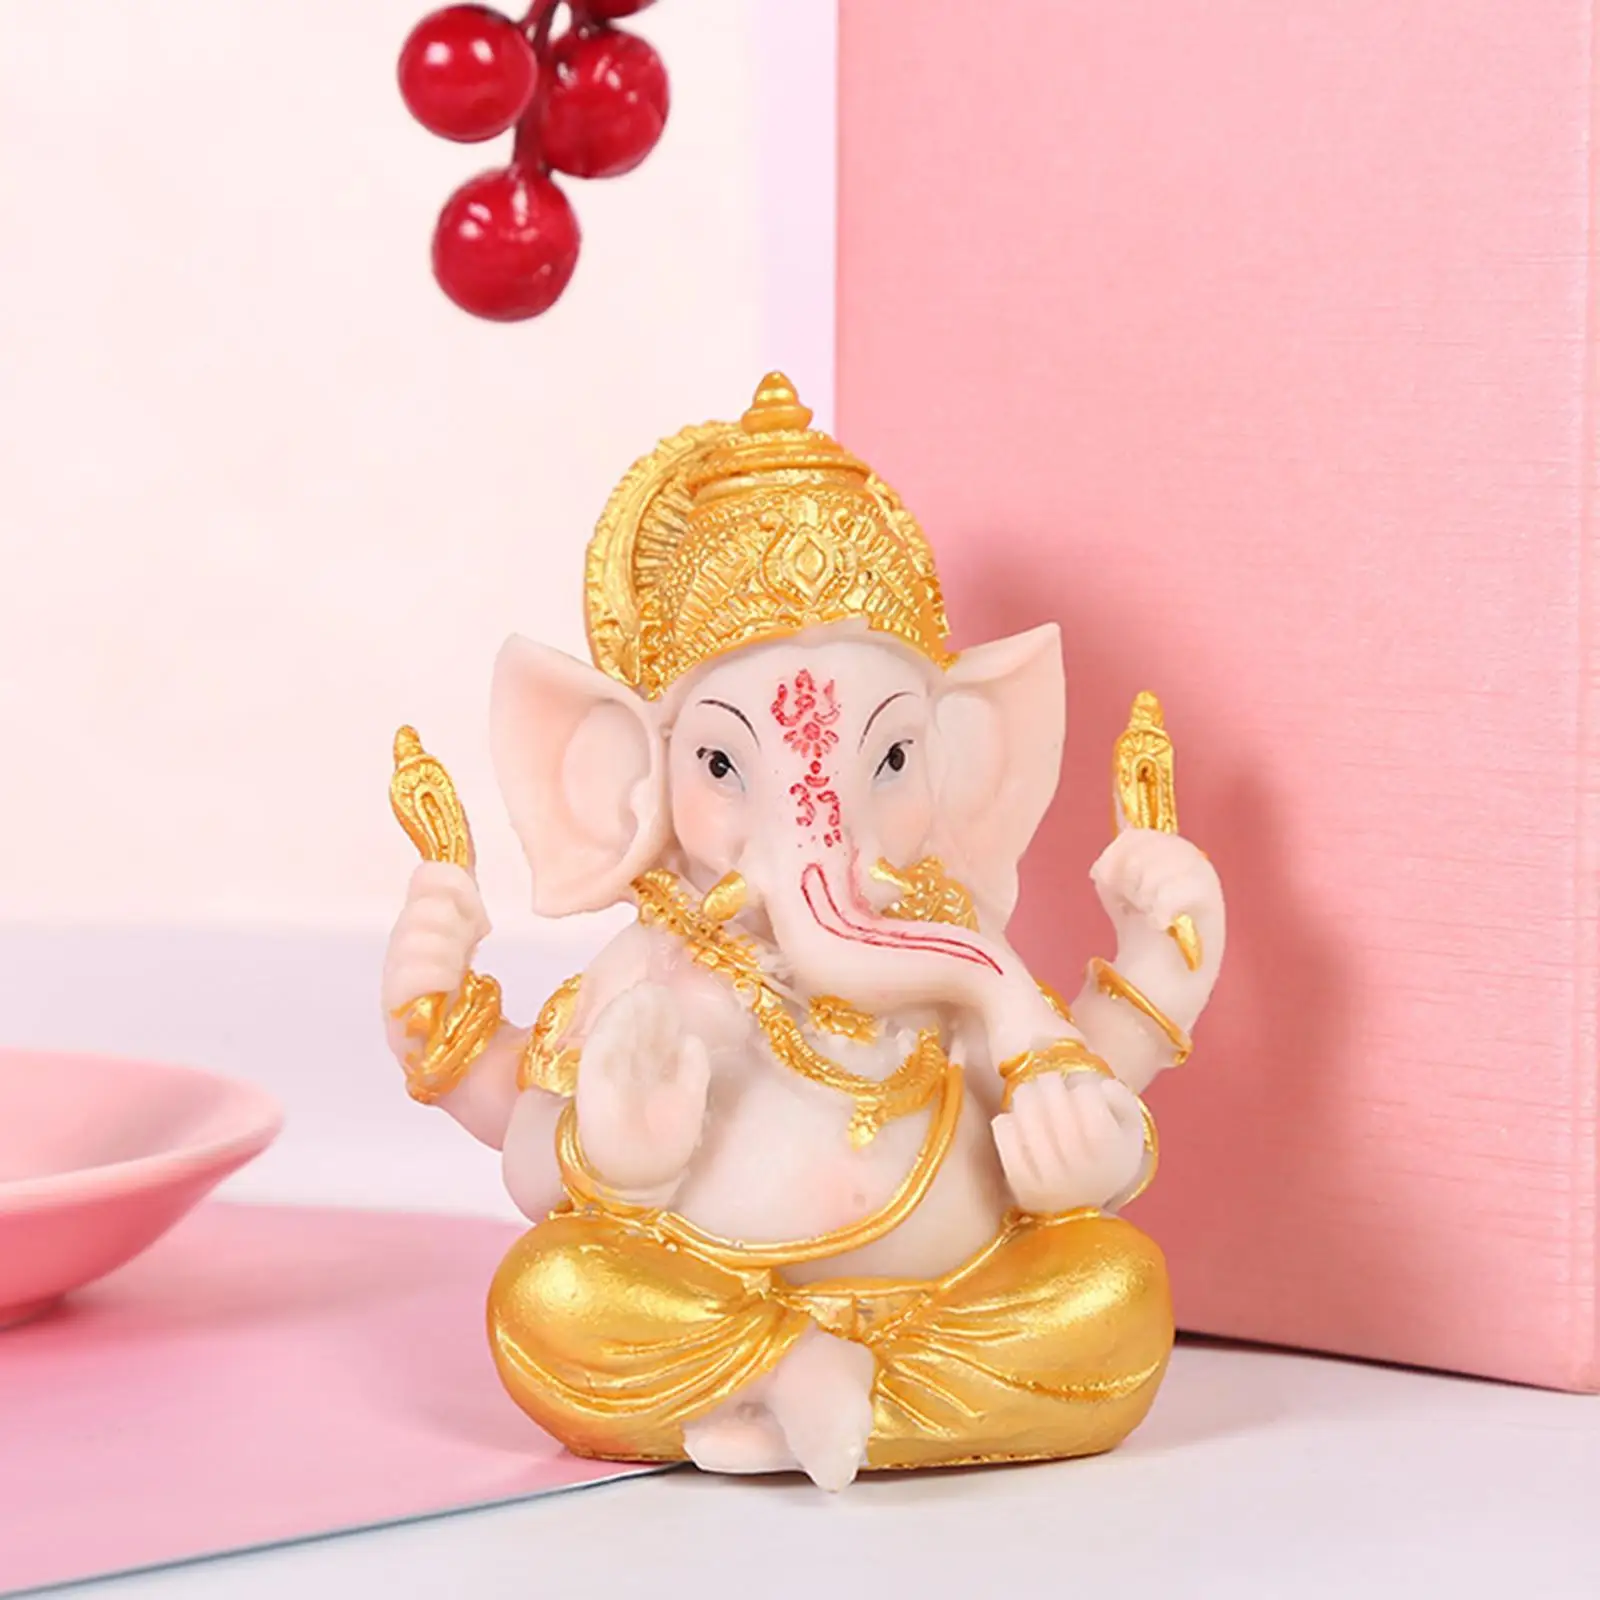  Sculpture  Statue Fengshui Resin Buddha Lucky Business Wealth Indian  Figurine for Office Shop Temple Home Ornaments